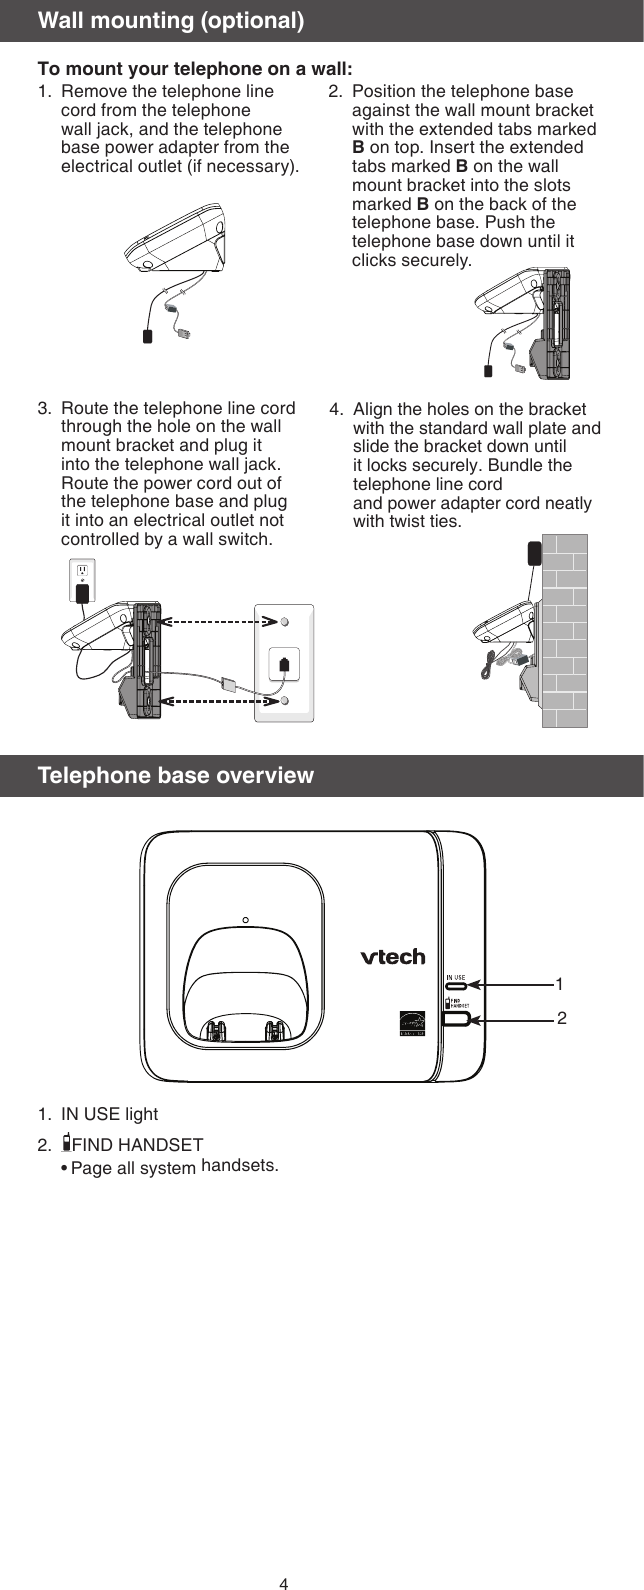 4Route the telephone line cord through the hole on the wall mount bracket and plug it into the telephone wall jack. Route the power cord out of the telephone base and plug it into an electrical outlet not controlled by a wall switch.3. Align the holes on the bracket with the standard wall plate and slide the bracket down until it locks securely. Bundle the telephone line cord  and power adapter cord neatly  with twist ties.4.Wall mounting (optional)To mount your telephone on a wall:Position the telephone base against the wall mount bracket with the extended tabs marked B on top. Insert the extended tabs marked B on the wall mount bracket into the slots marked B on the back of the telephone base. Push the telephone base down until it clicks securely.2.Remove the telephone line cord from the telephone wall jack, and the telephone base power adapter from the electrical outlet (if necessary). 1.Telephone base overviewIN USE lightFIND HANDSETPage all system handsets.1.2.•12